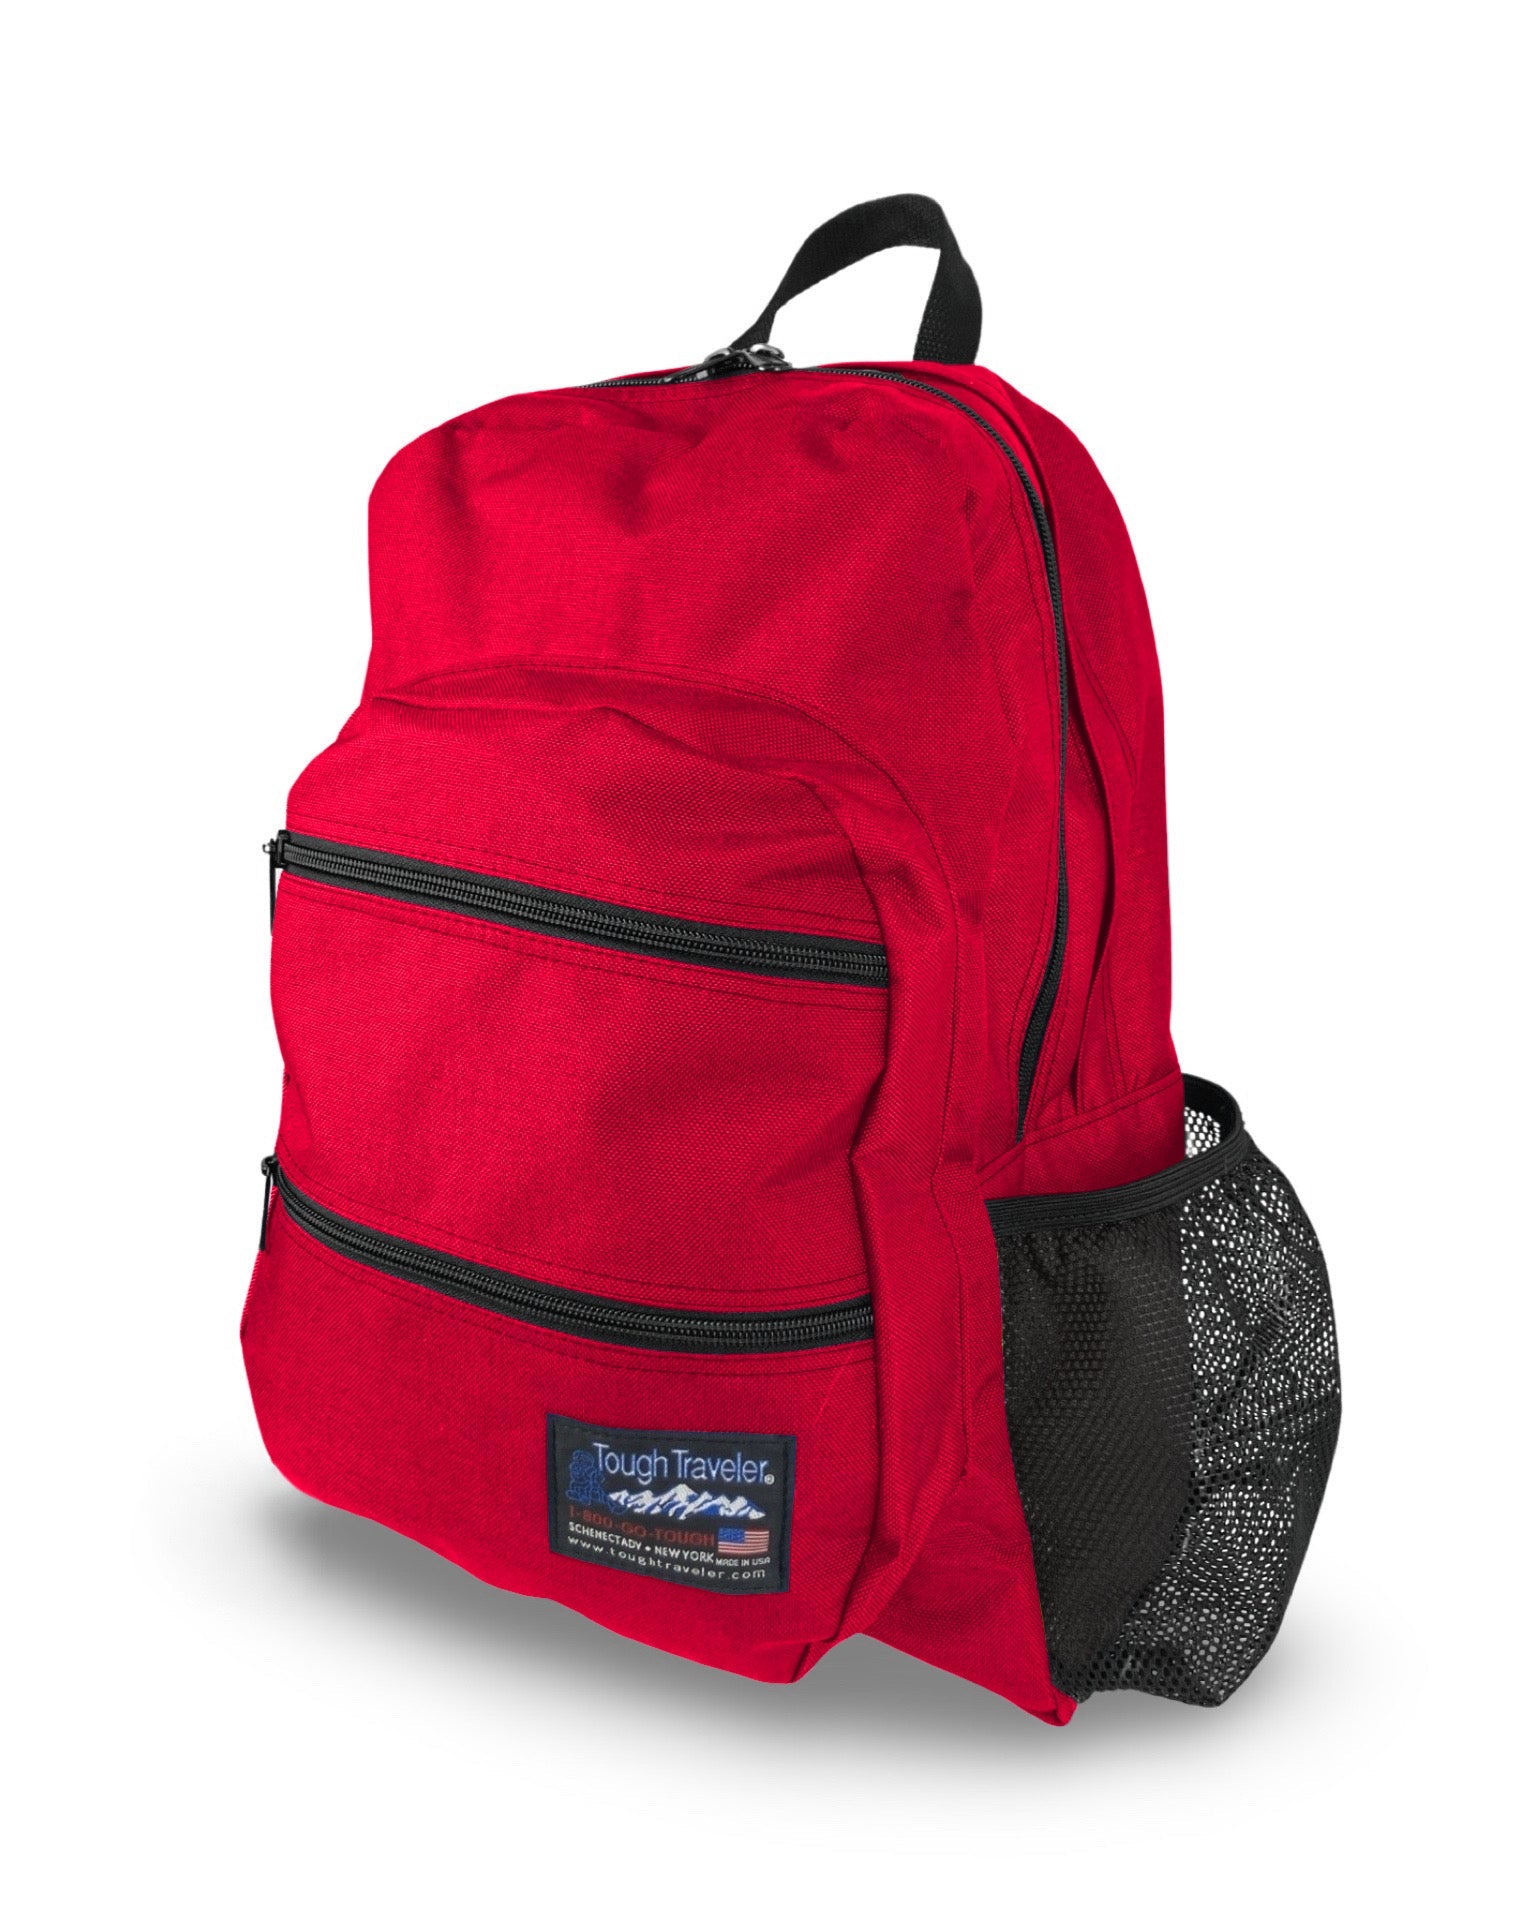 SLING DOUBLE CAYUGA Backpacks, by Tough Traveler. Made in USA since 1970